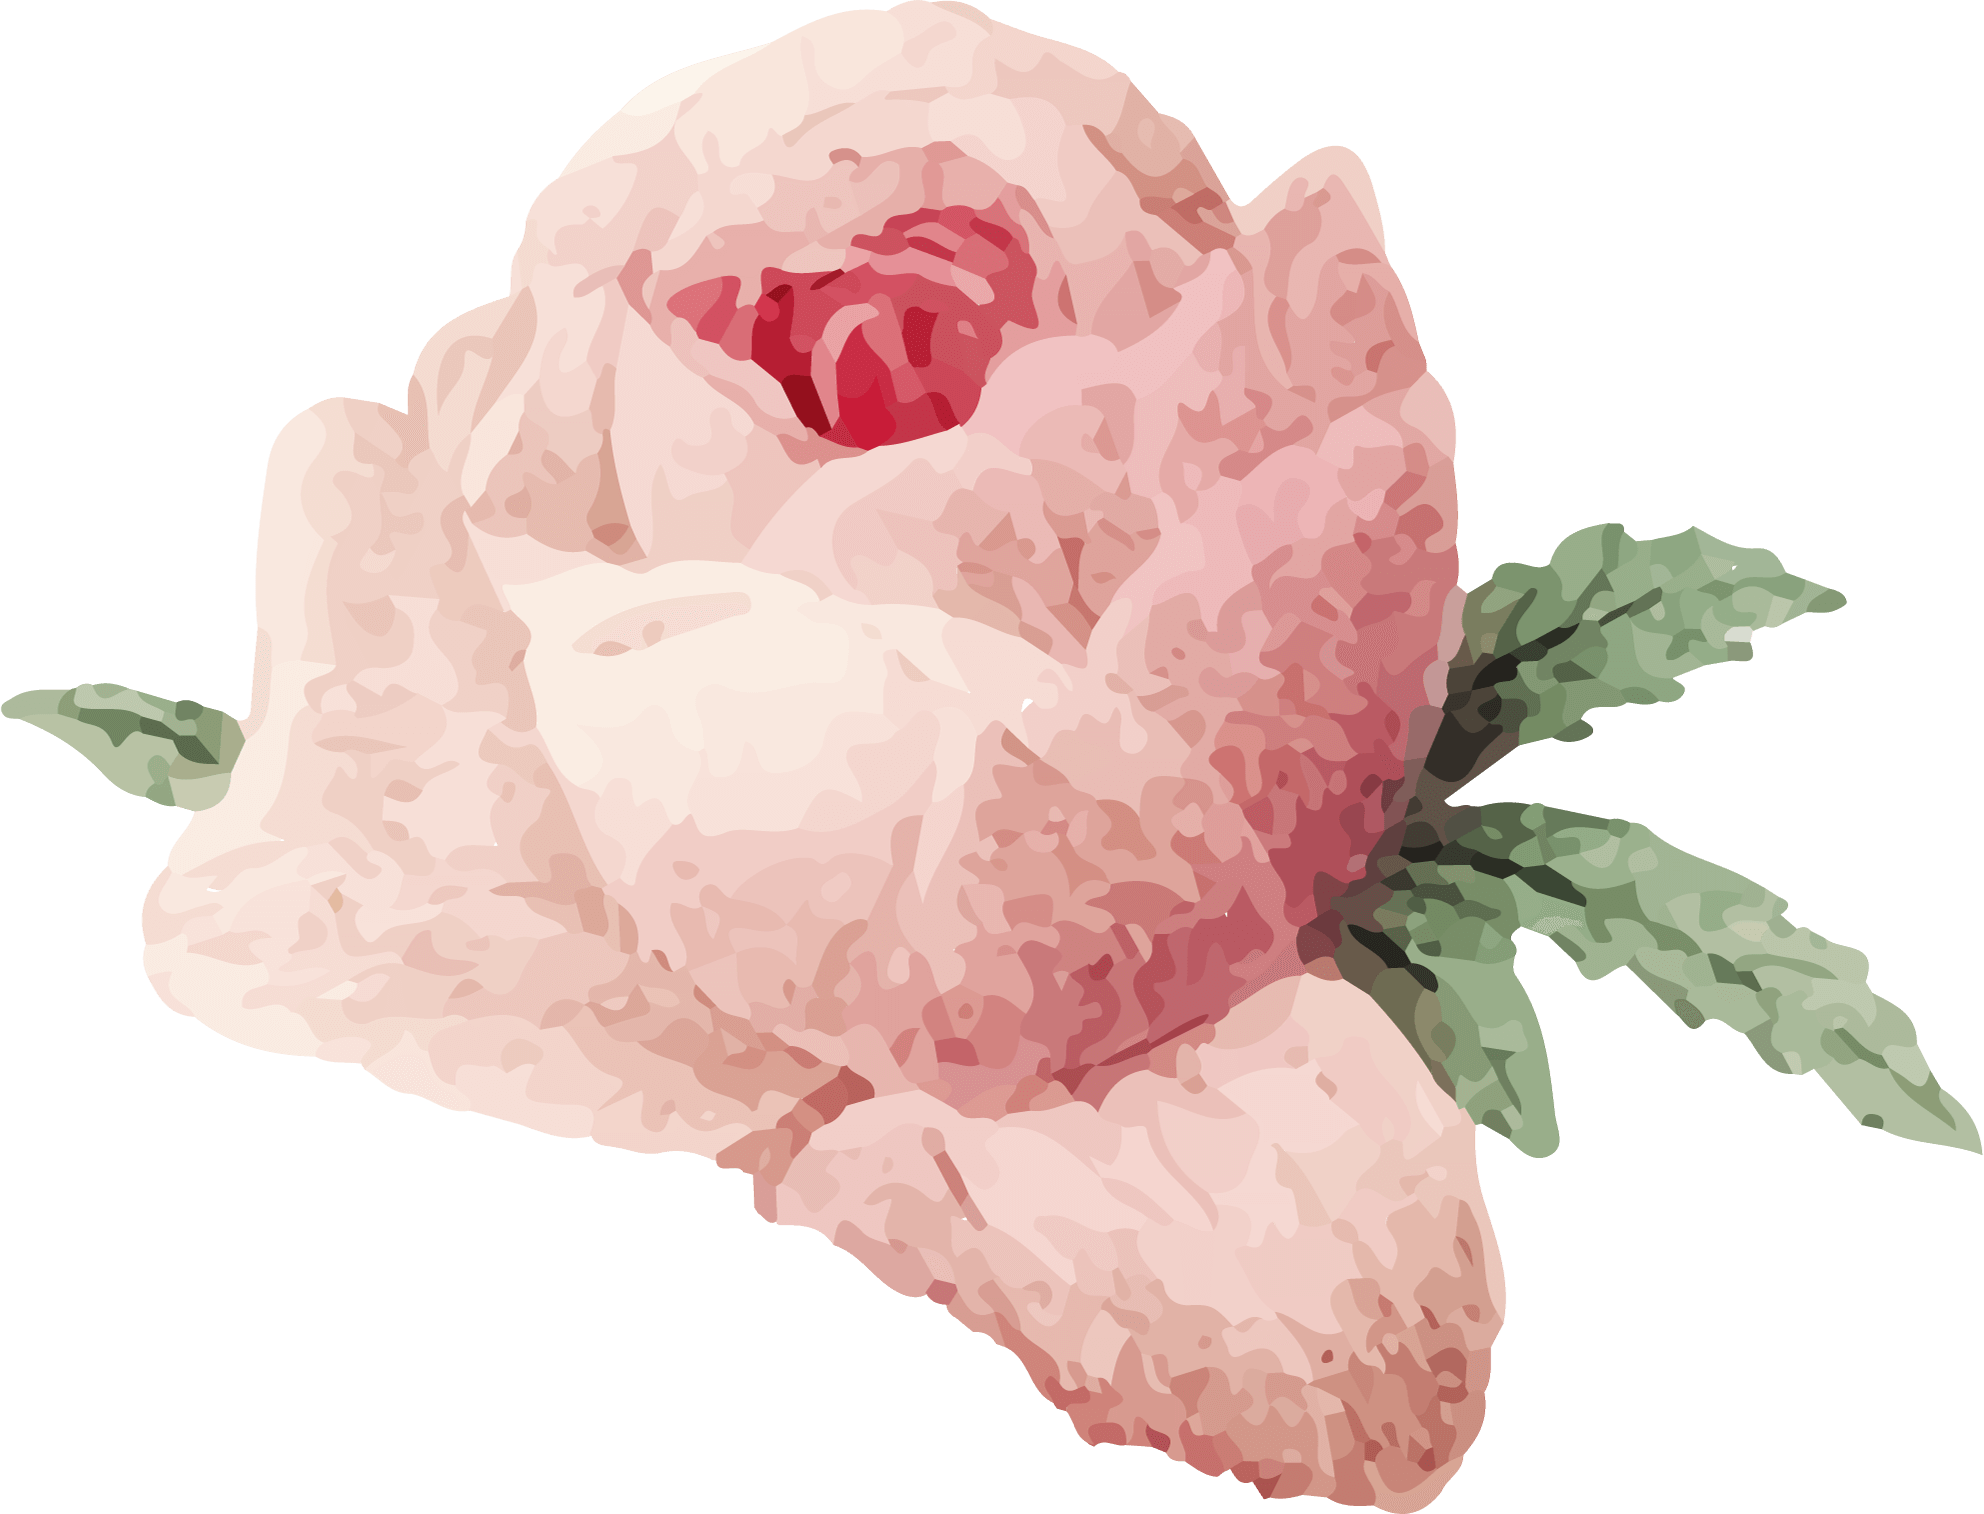 Aesthetic Flower PNG Image File